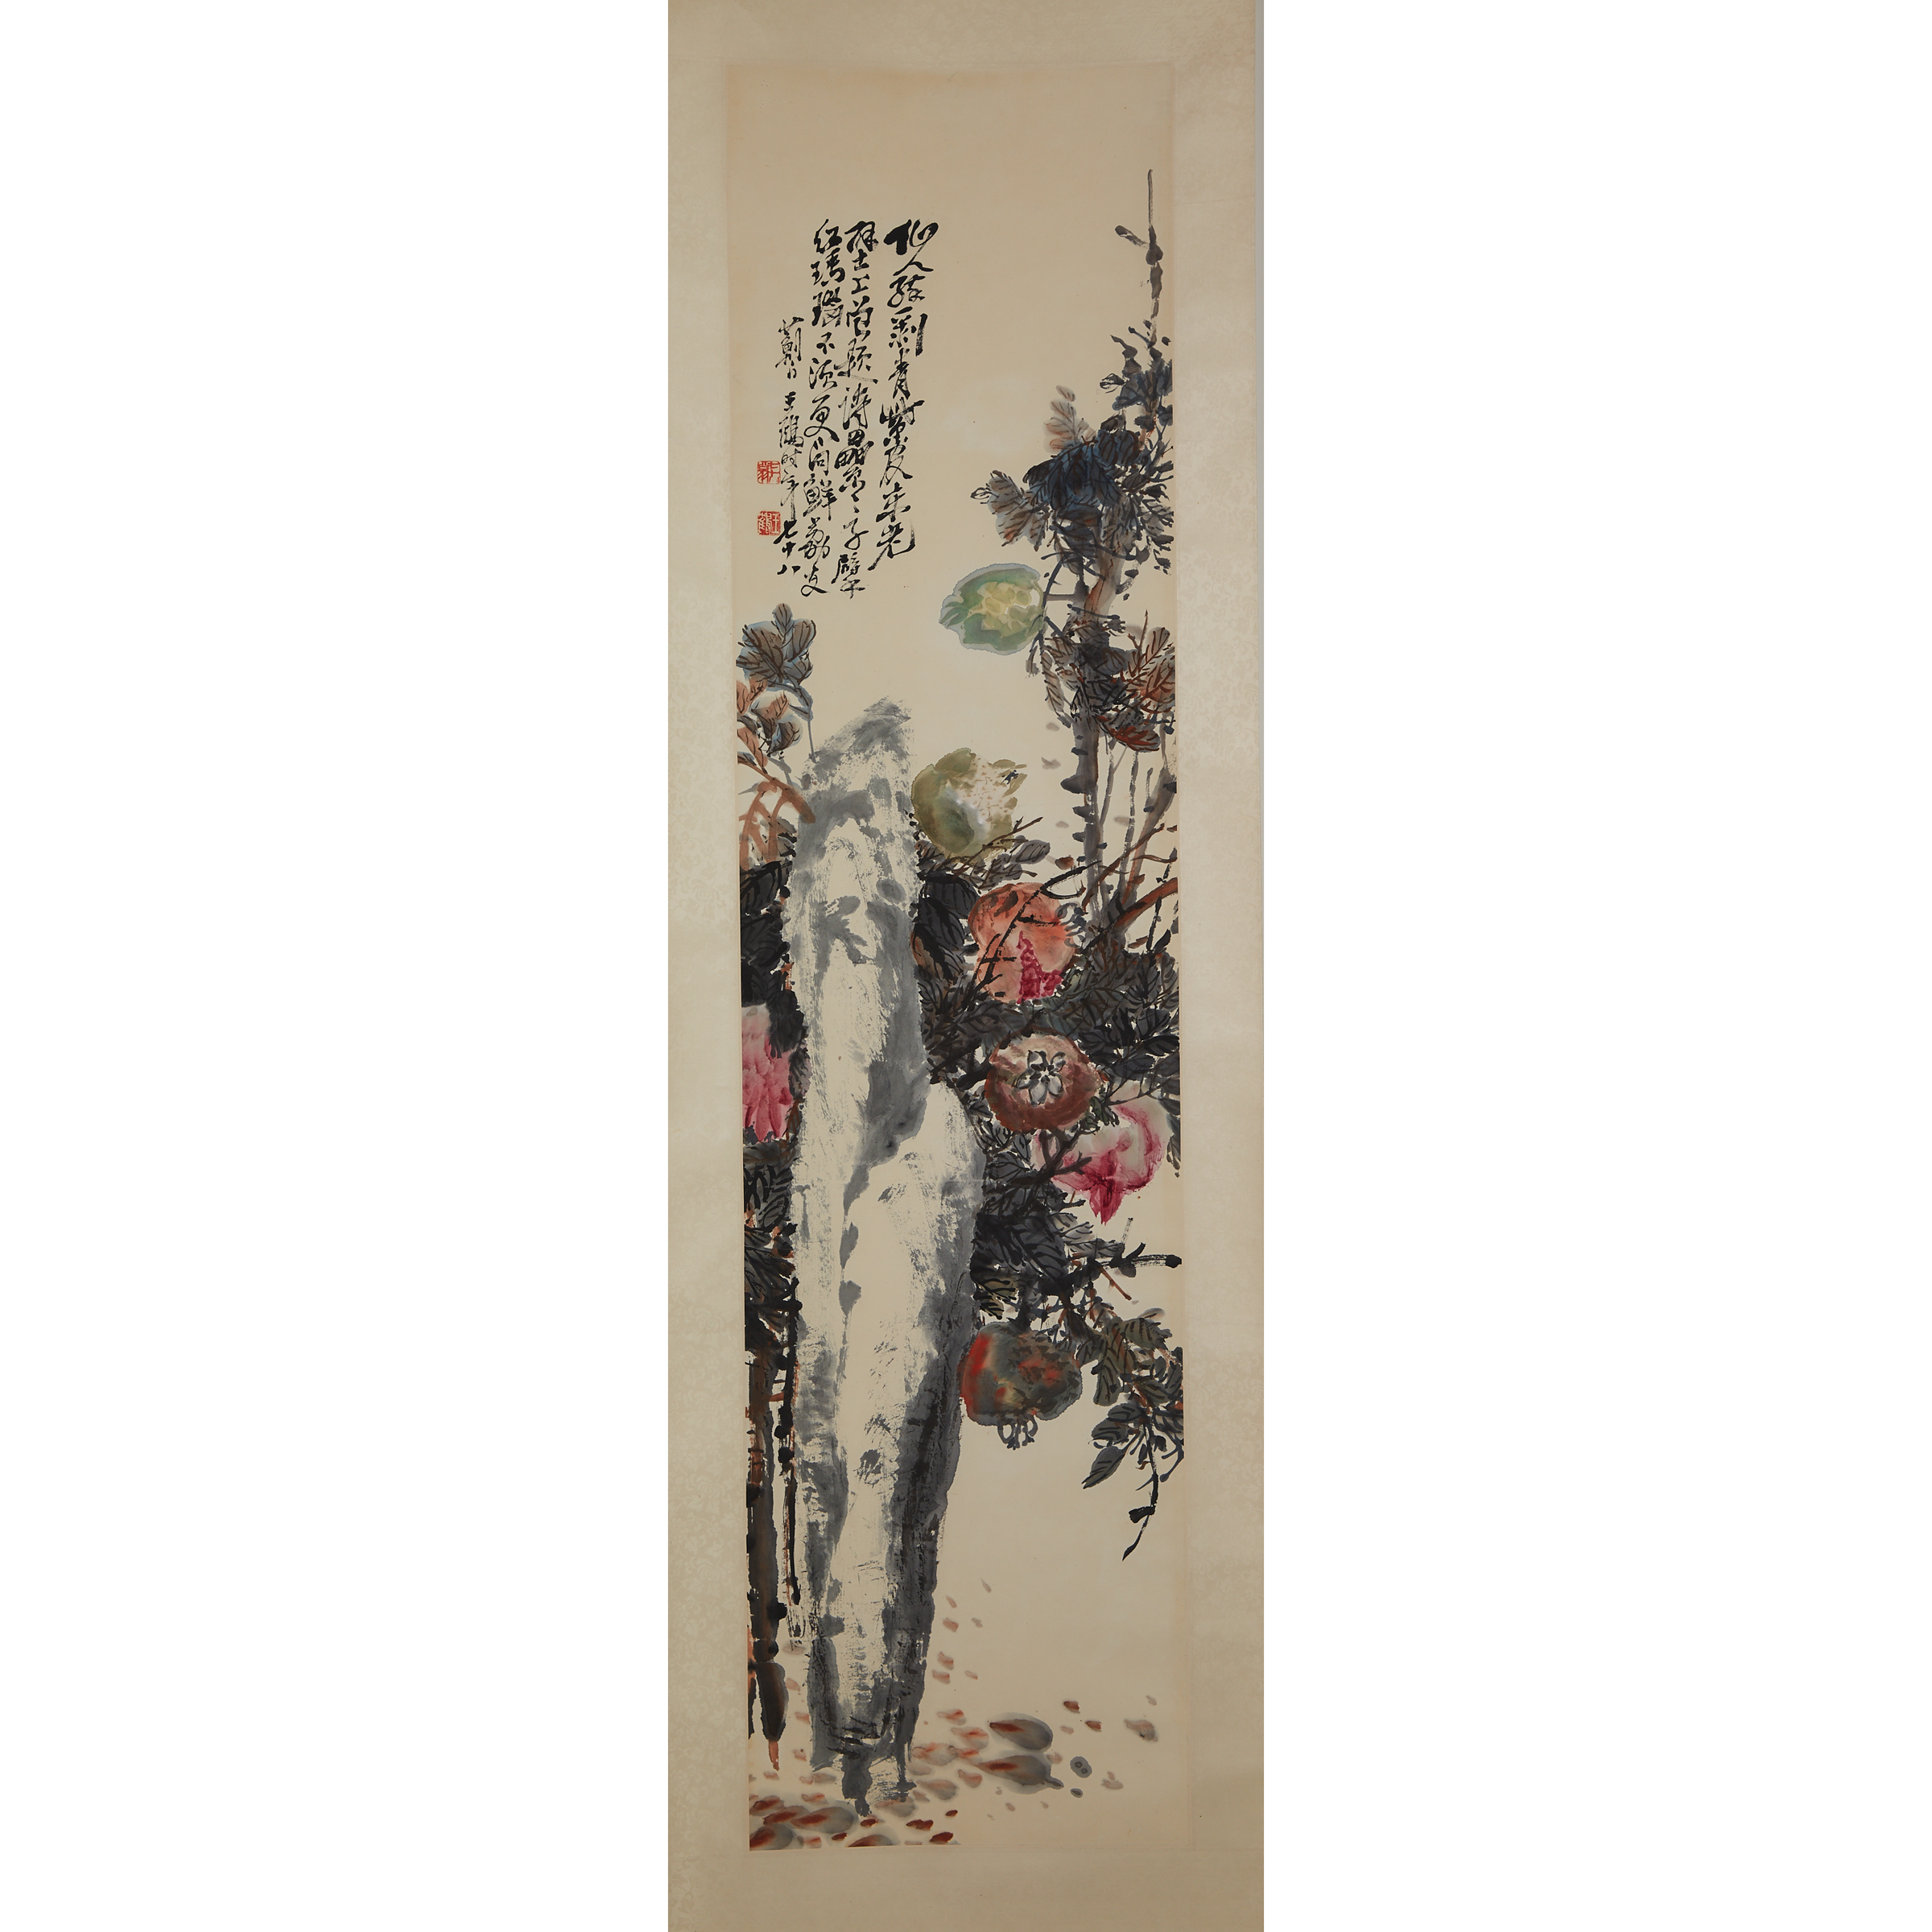 A Group of Three Scroll Paintings